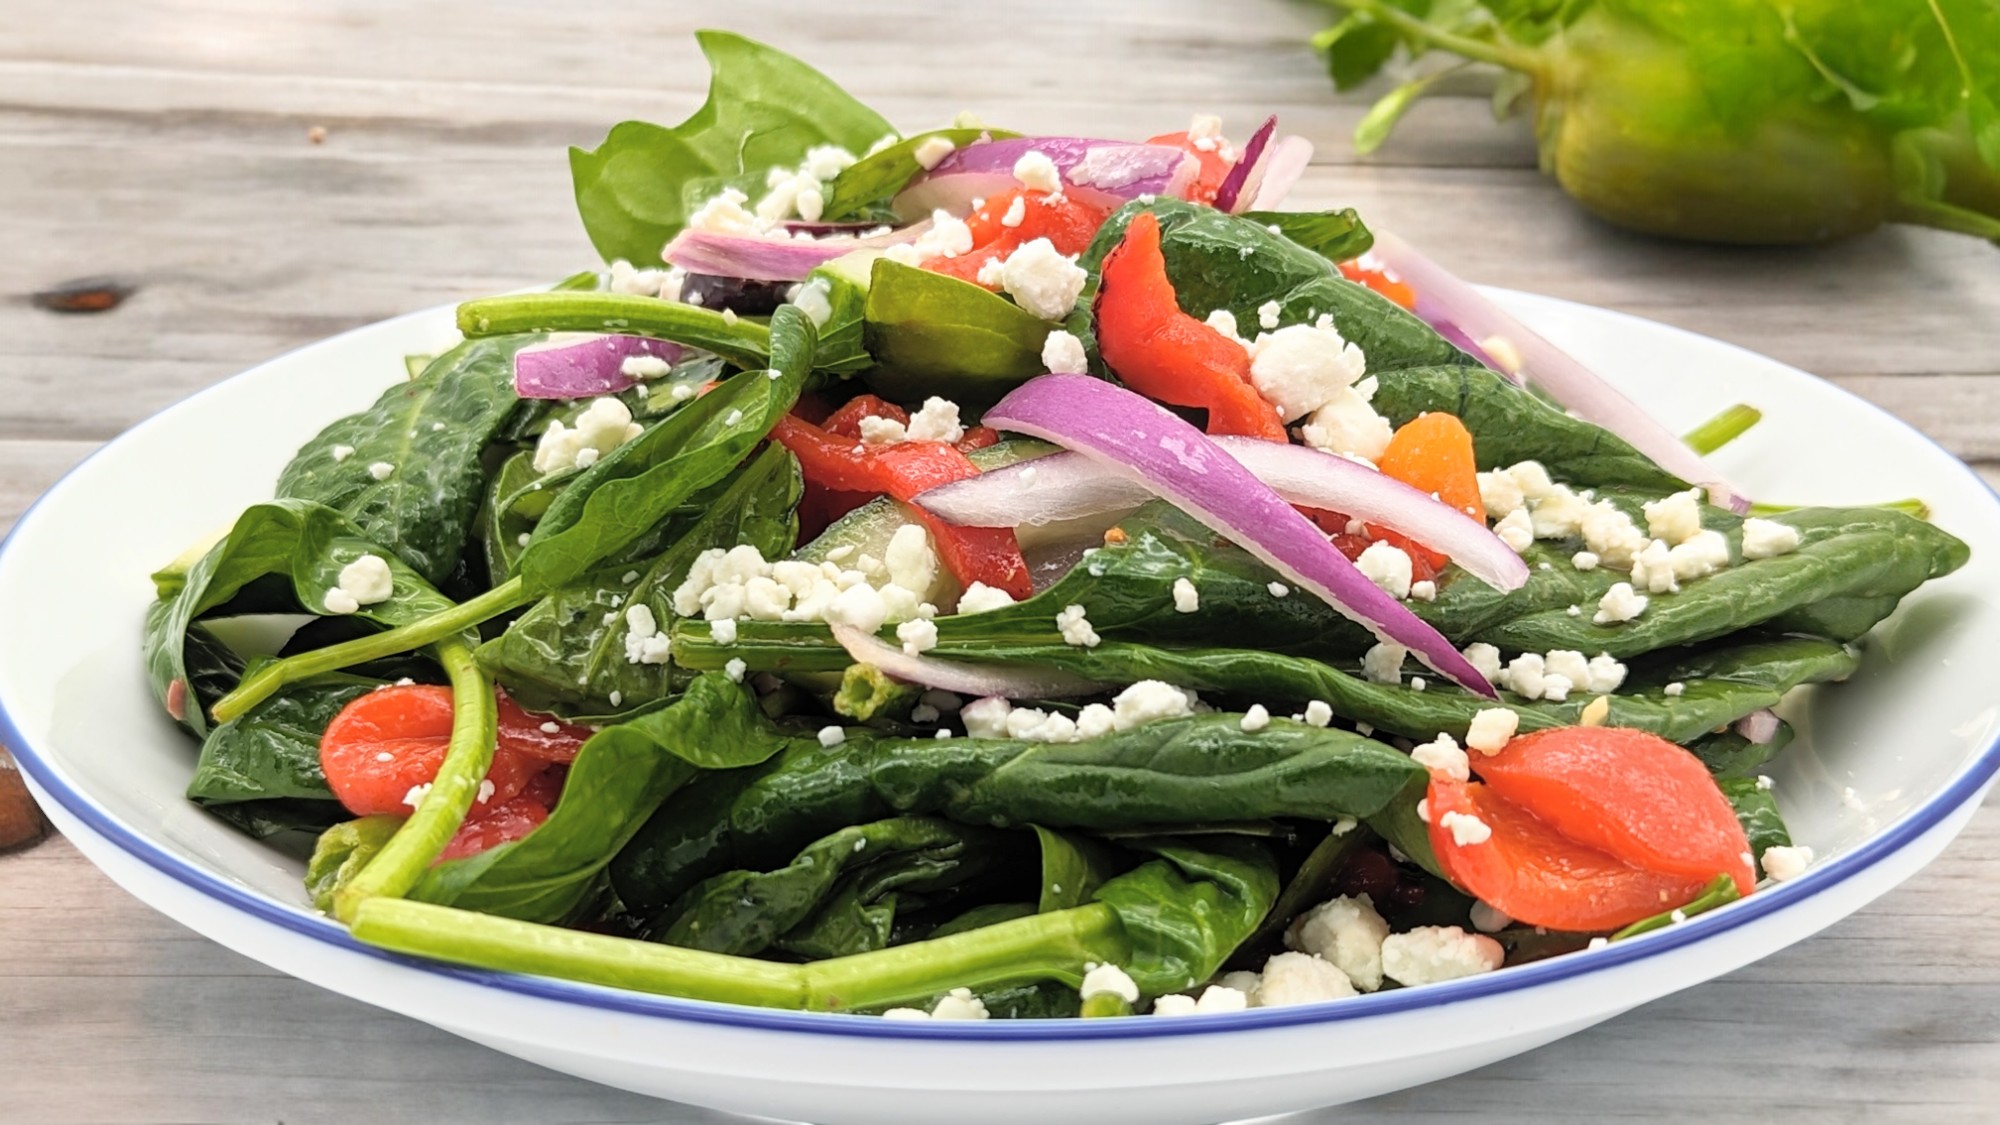 SPINACH & GOAT CHEESE SALAD